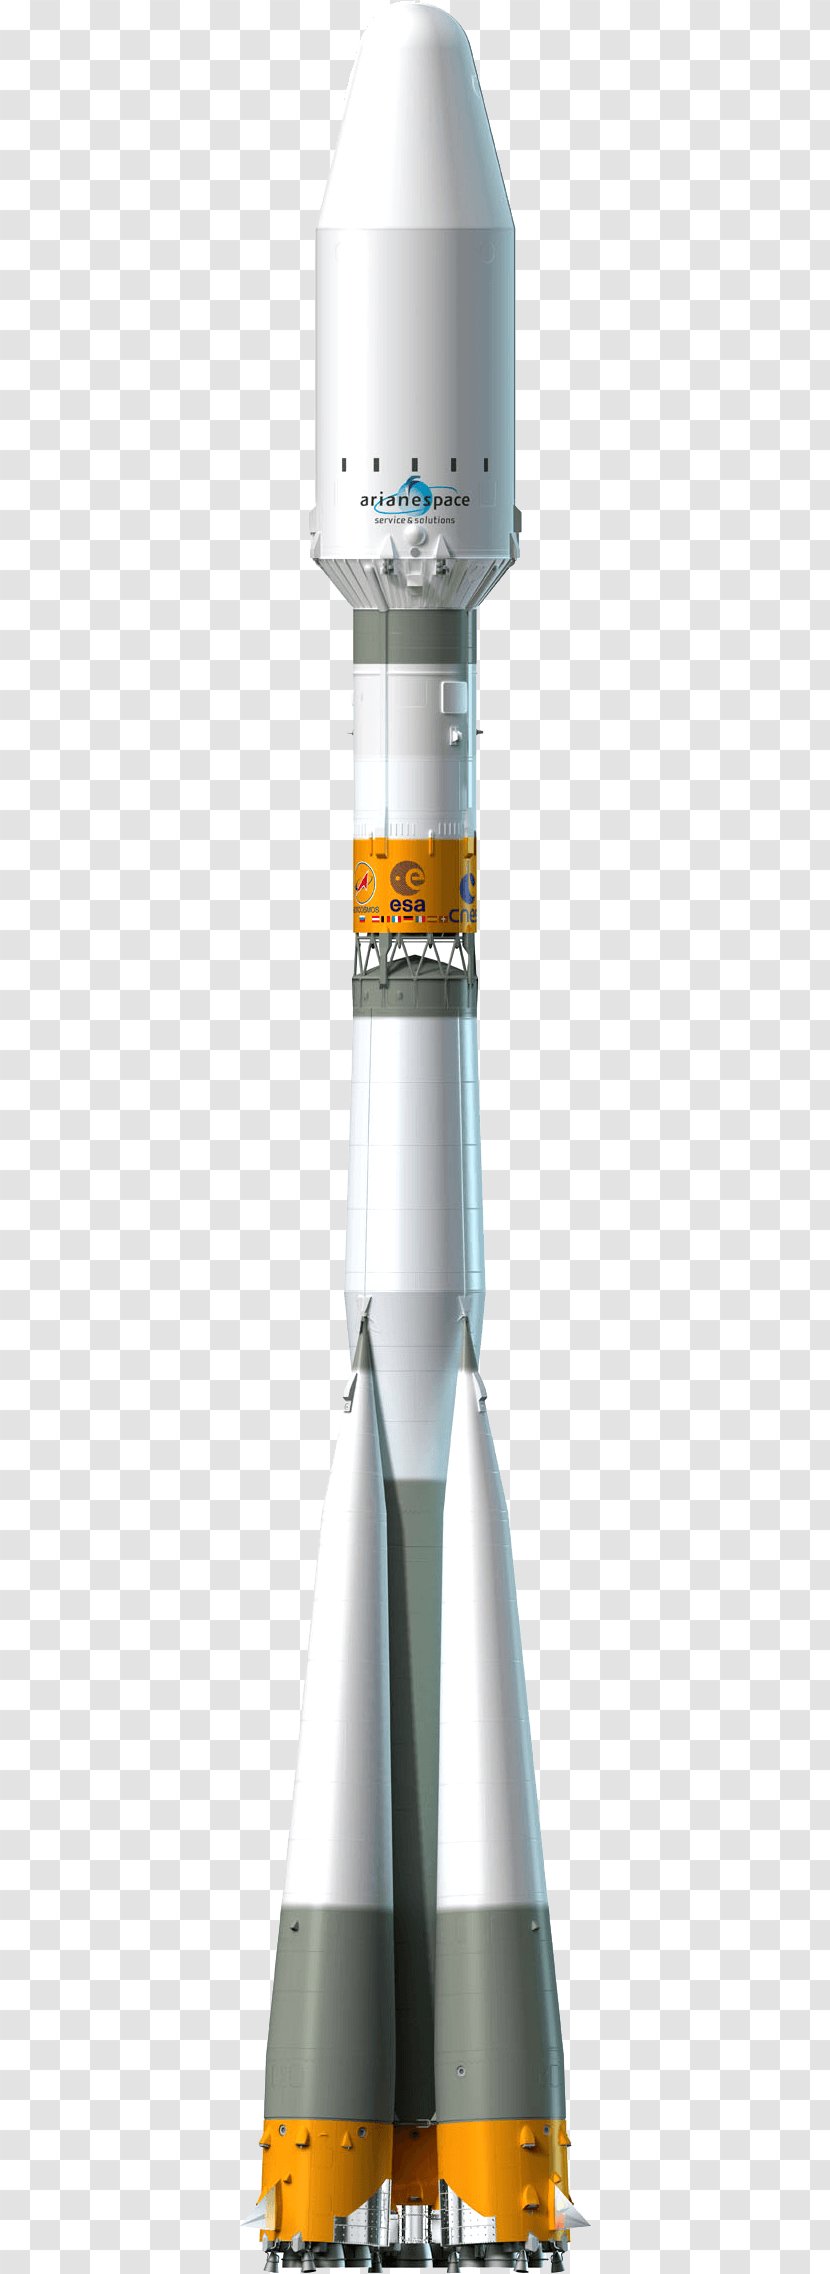 Soyuz At The Guiana Space Centre Rocket Launch Vehicle Arianespace - Sputnik - Manned Spaceship Transparent PNG